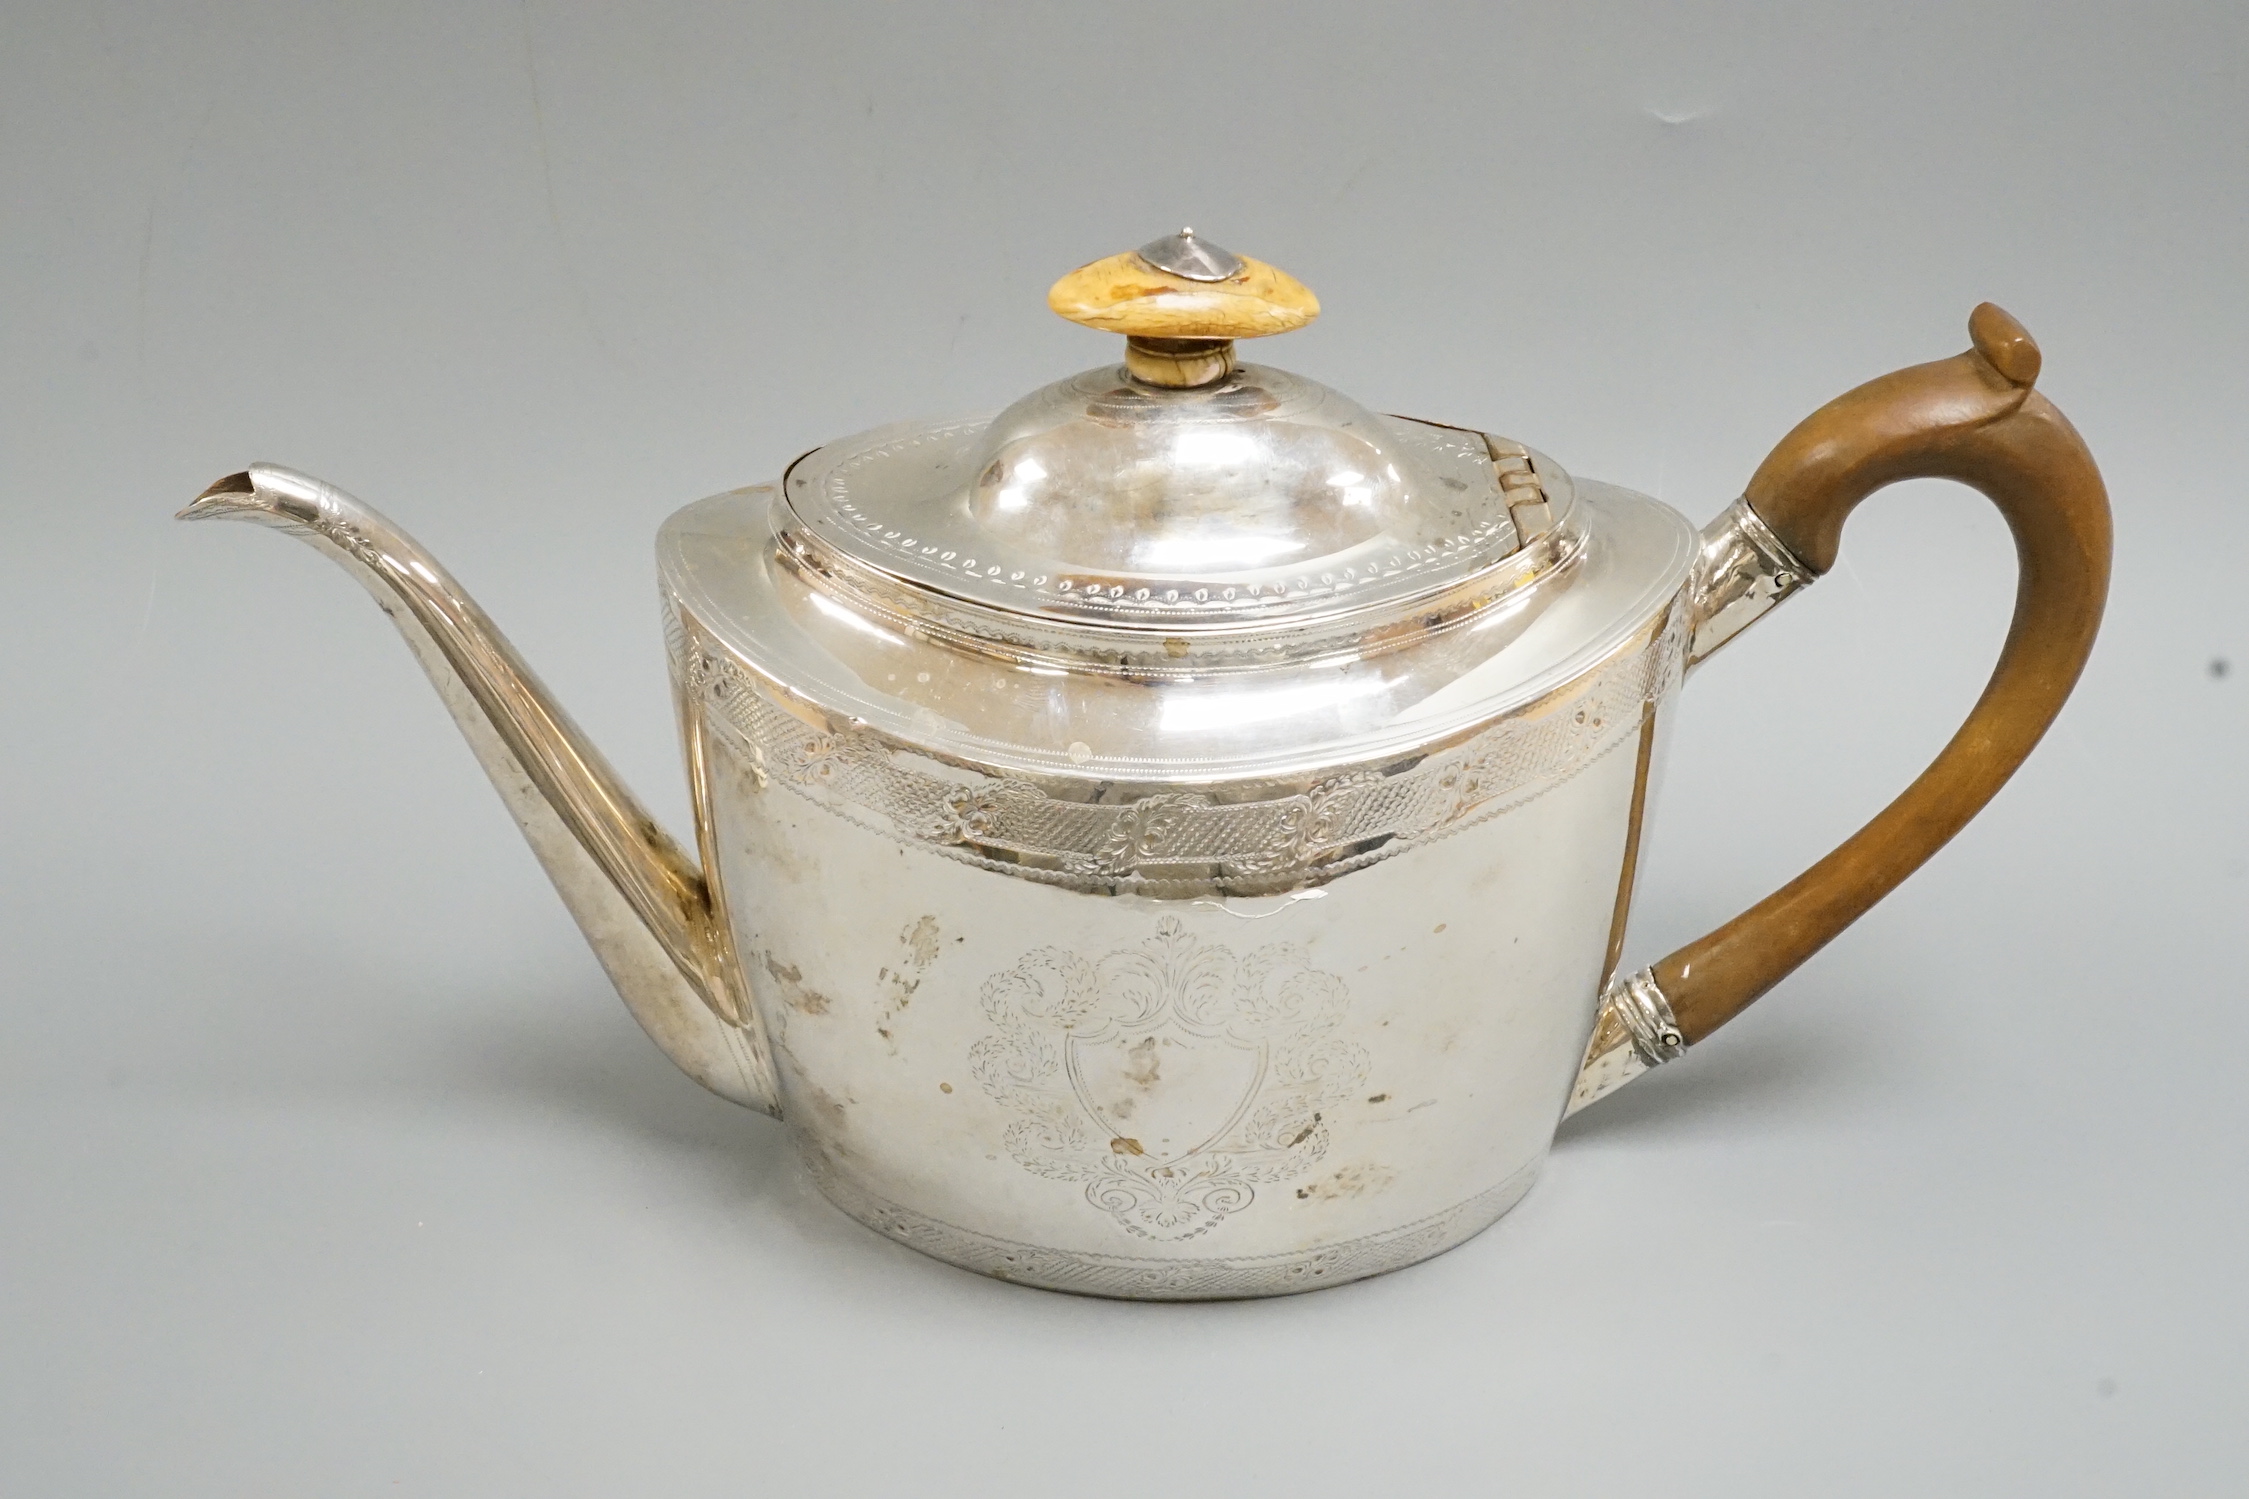 A George III chased oval silver teapot, by Thomas Wallis, London, 1798, gross weight 15.4oz.